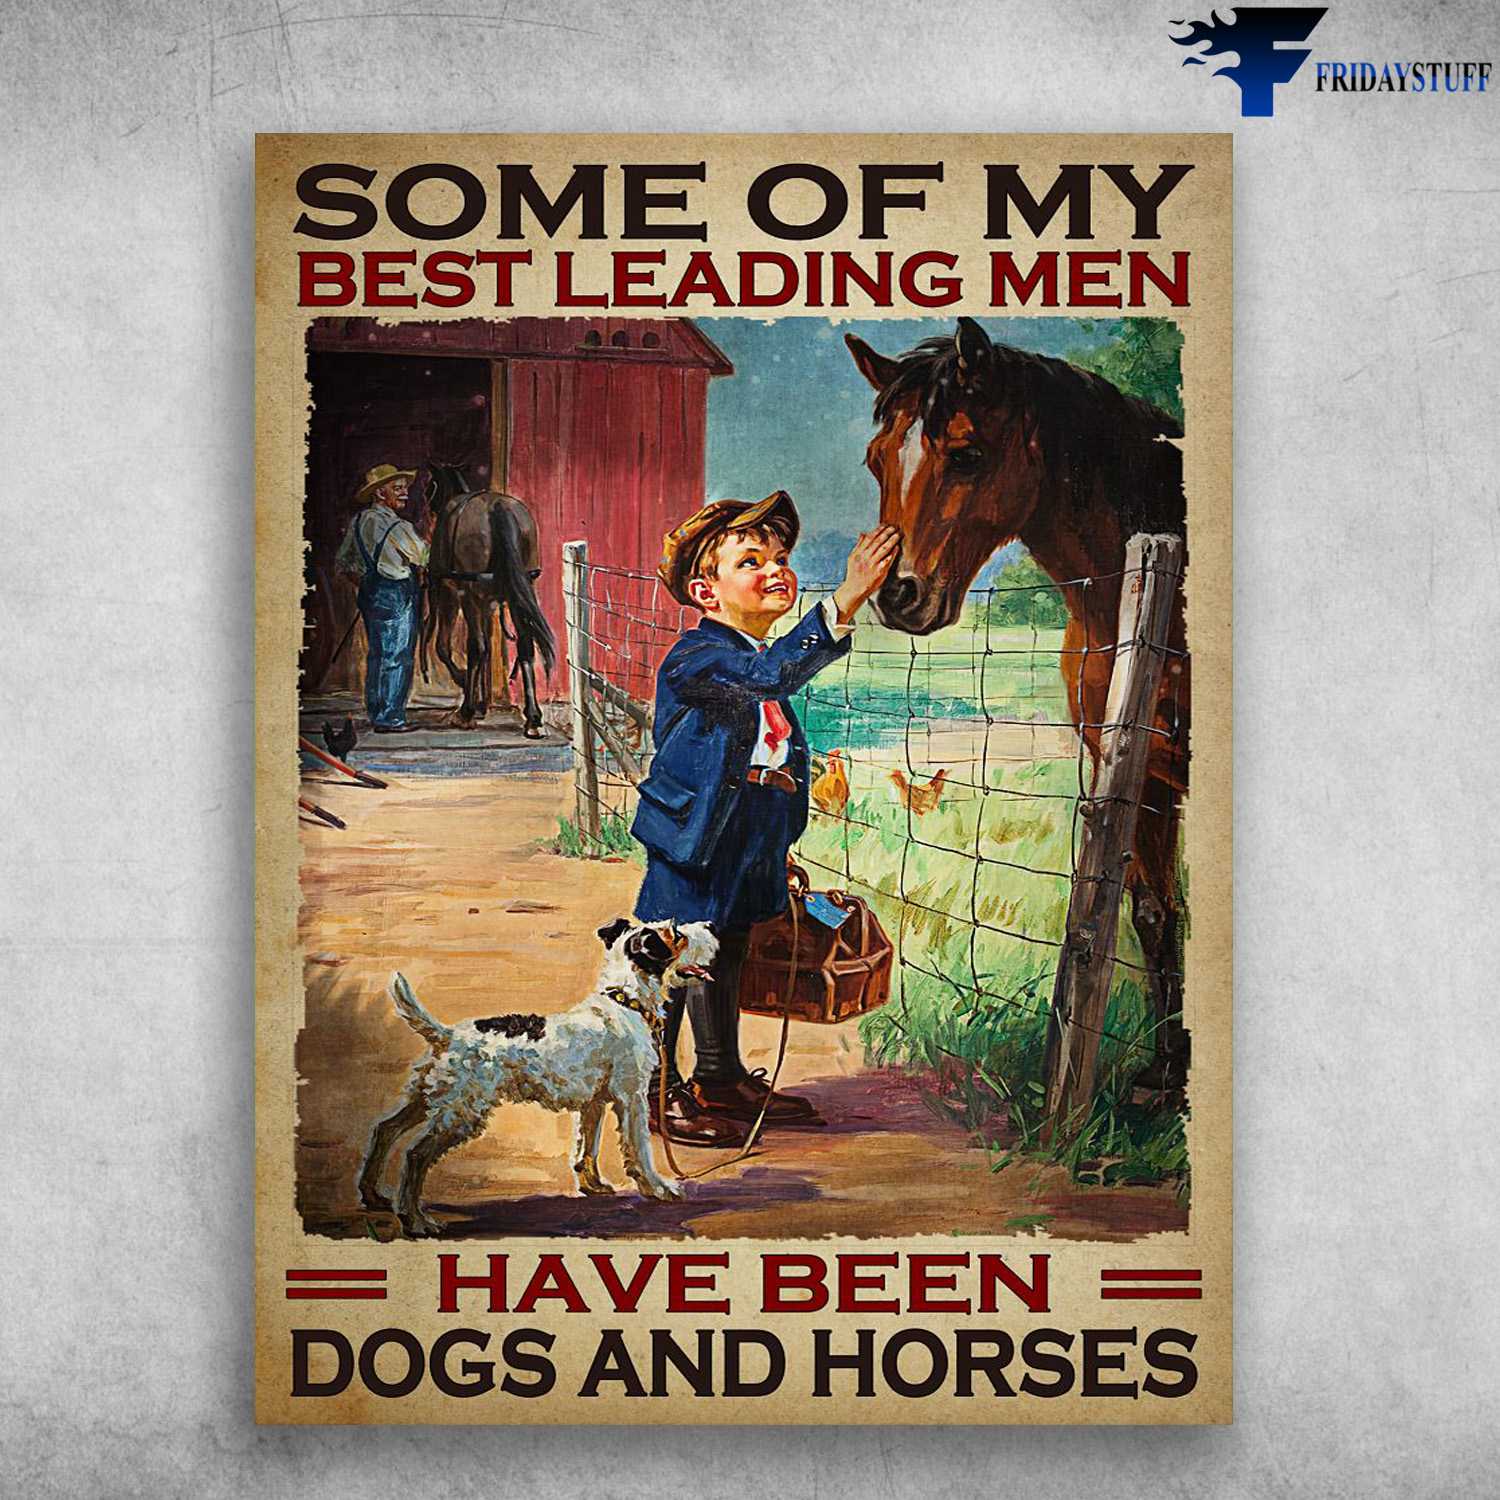 Horse And Dog, Horse Poster - Some Of My Best Leading Men, Have Been Dogs And Horses